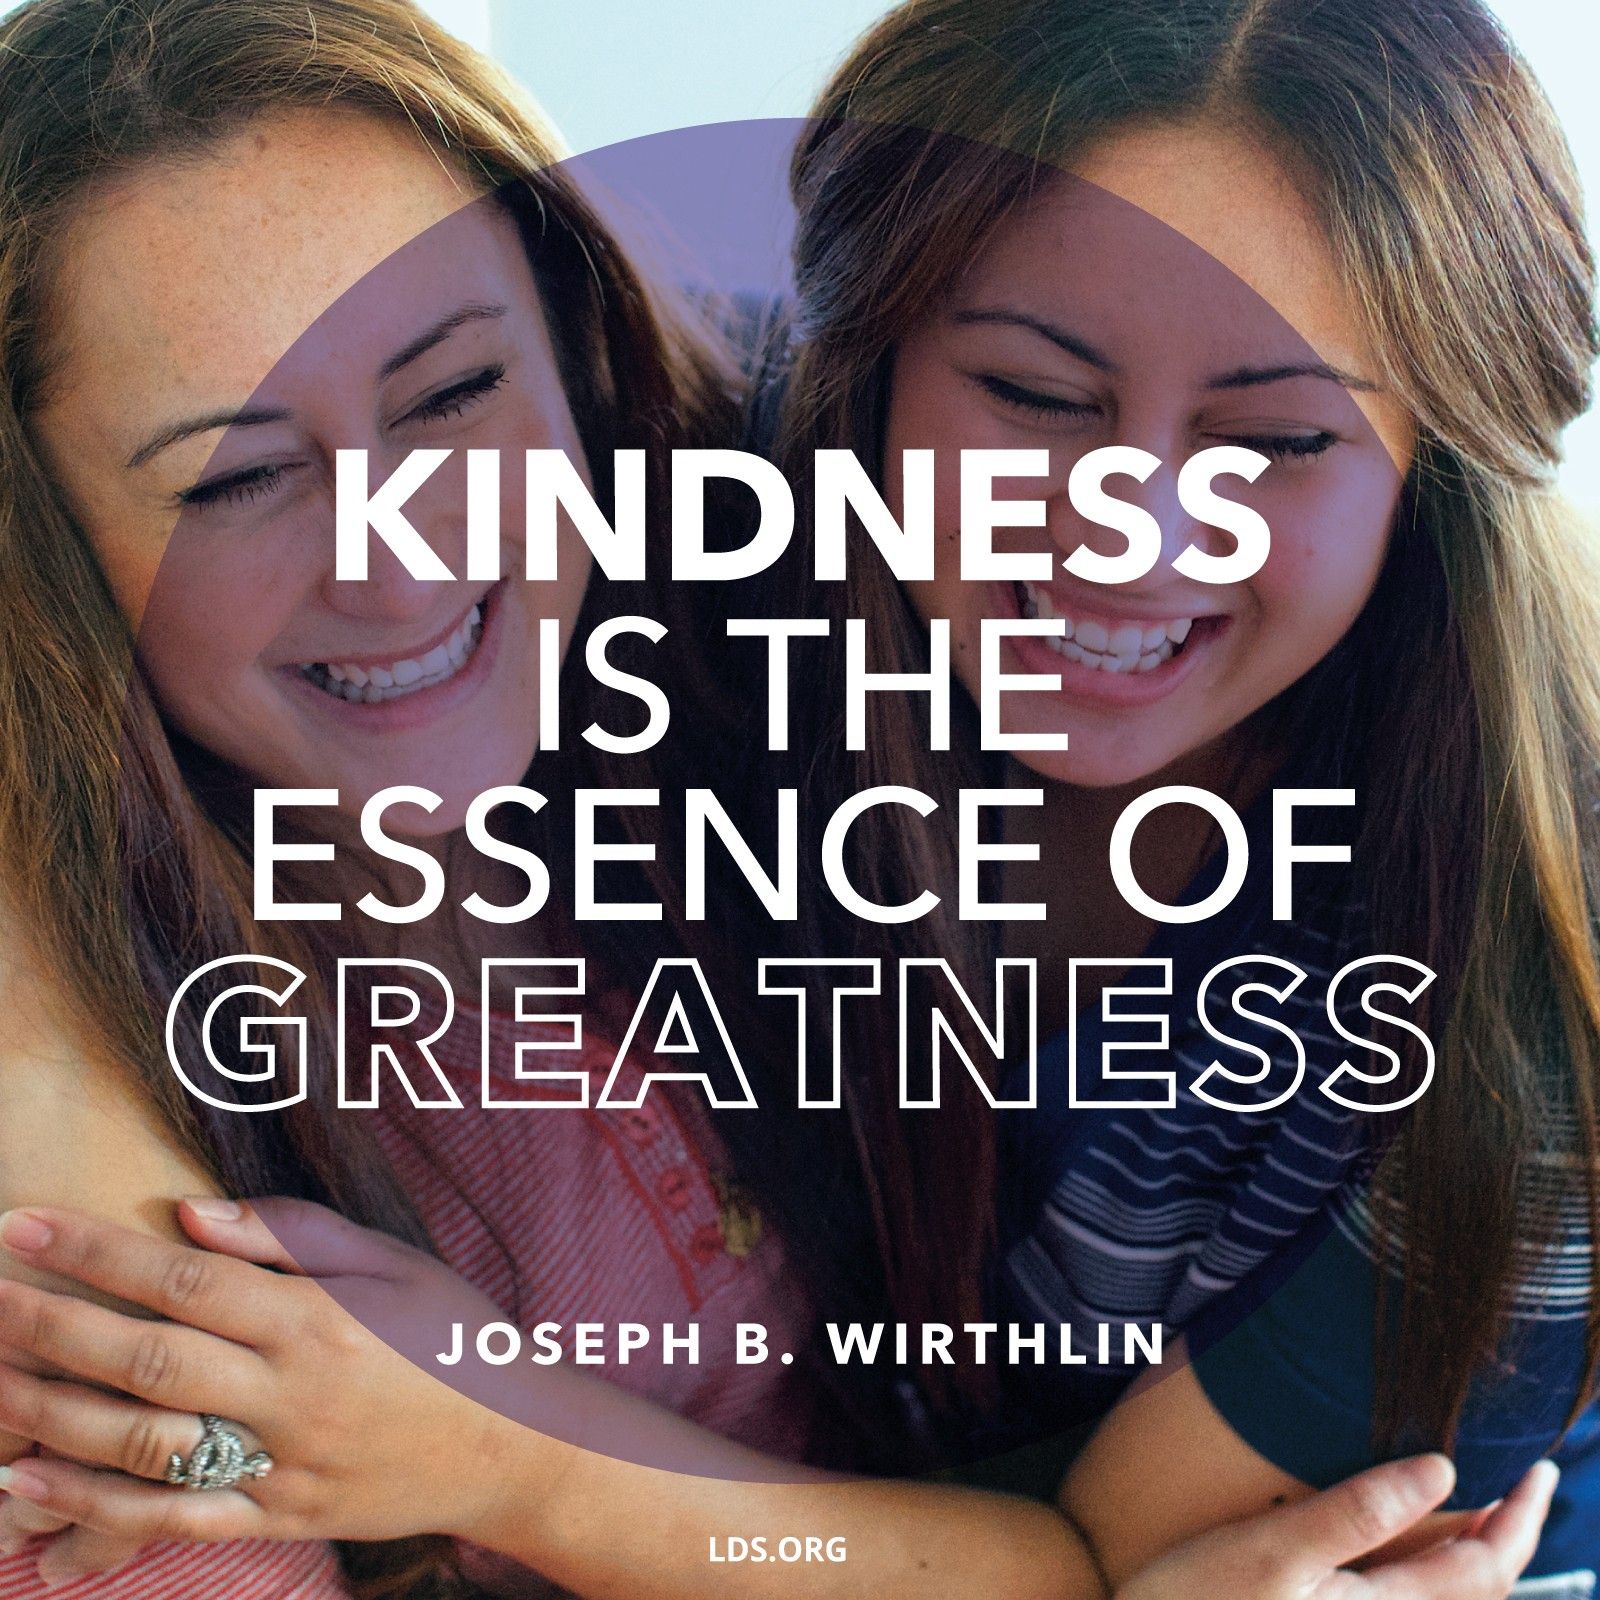 “Kindness is the essence of greatness.”—Elder Joseph B. Wirthlin, “The Virtue of Kindness” © See Individual Images ipCode 1.